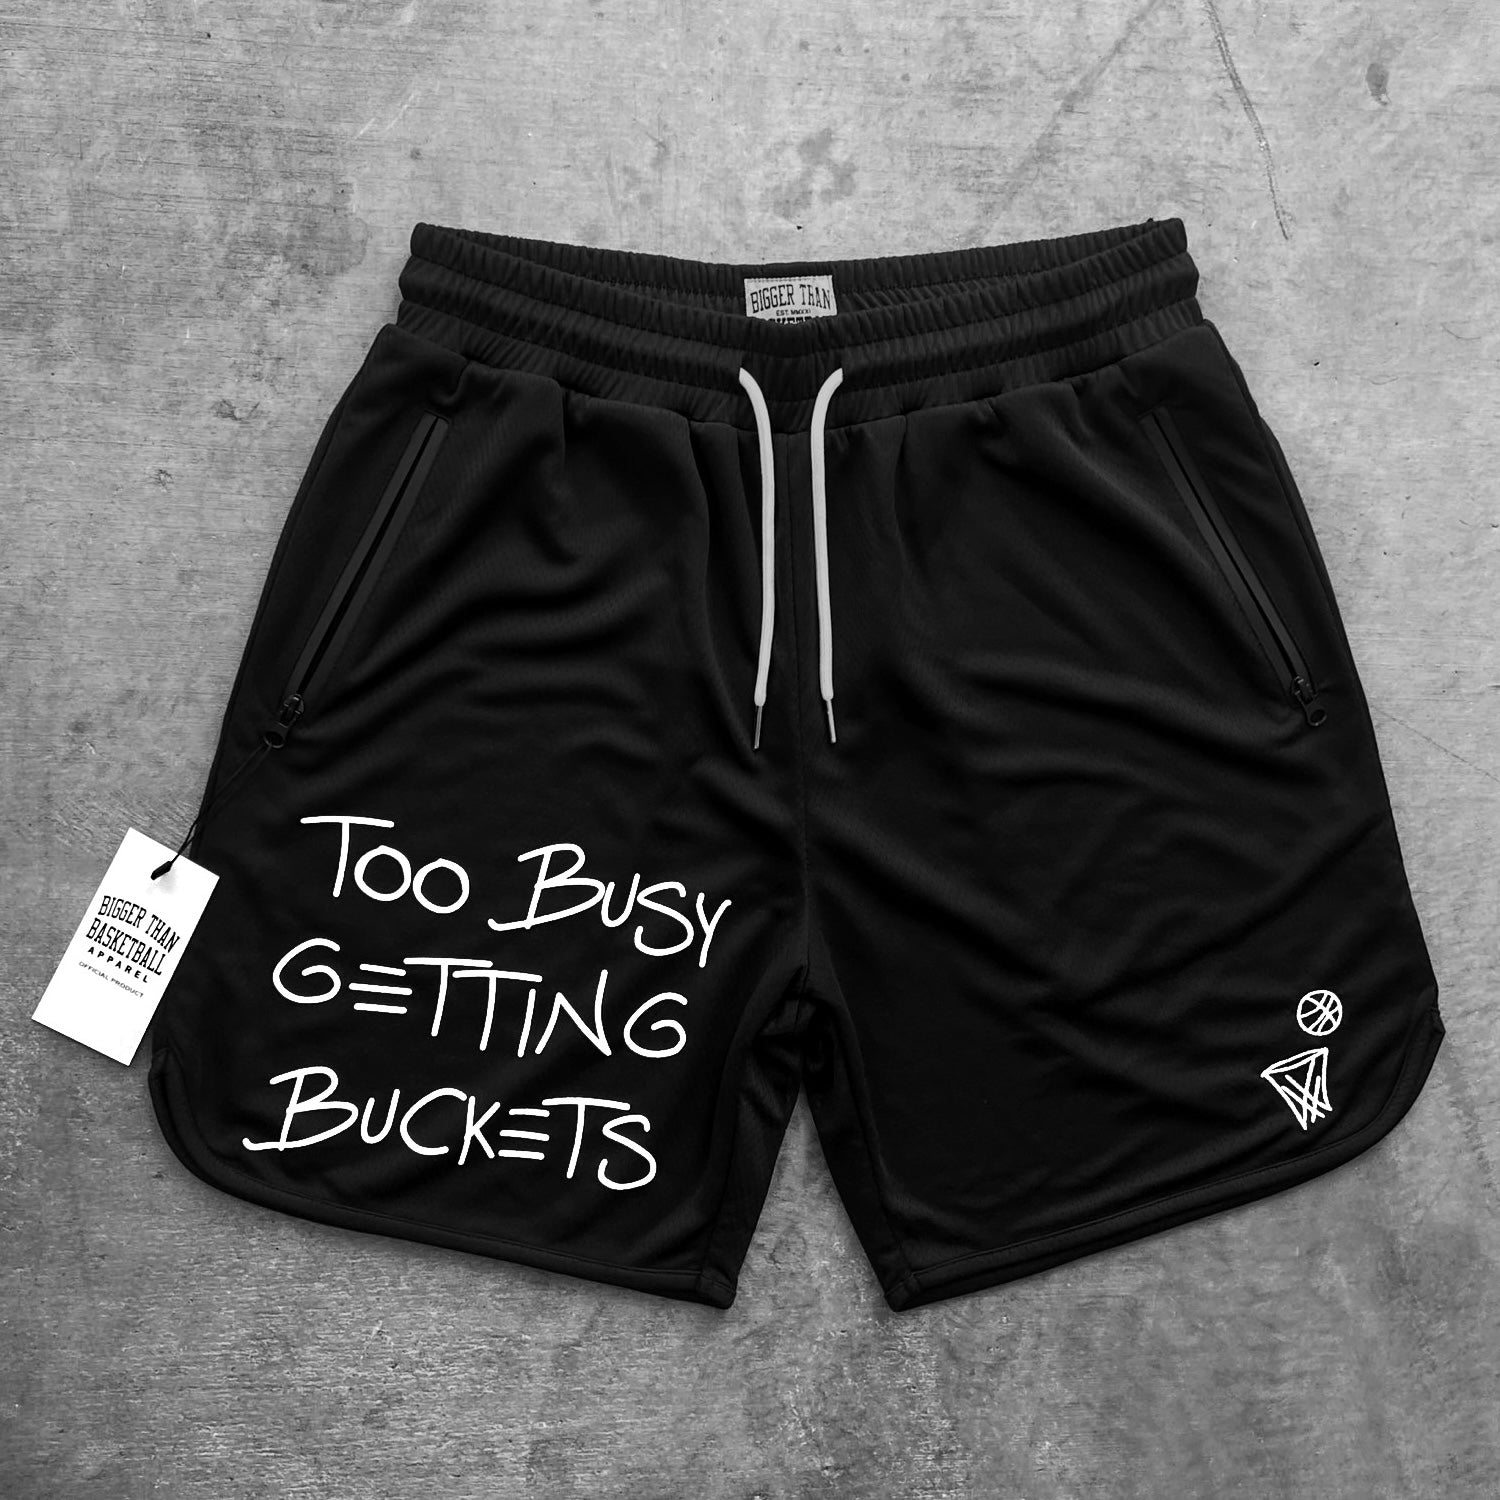 Too Busy Getting Buckets - Shorts - Black